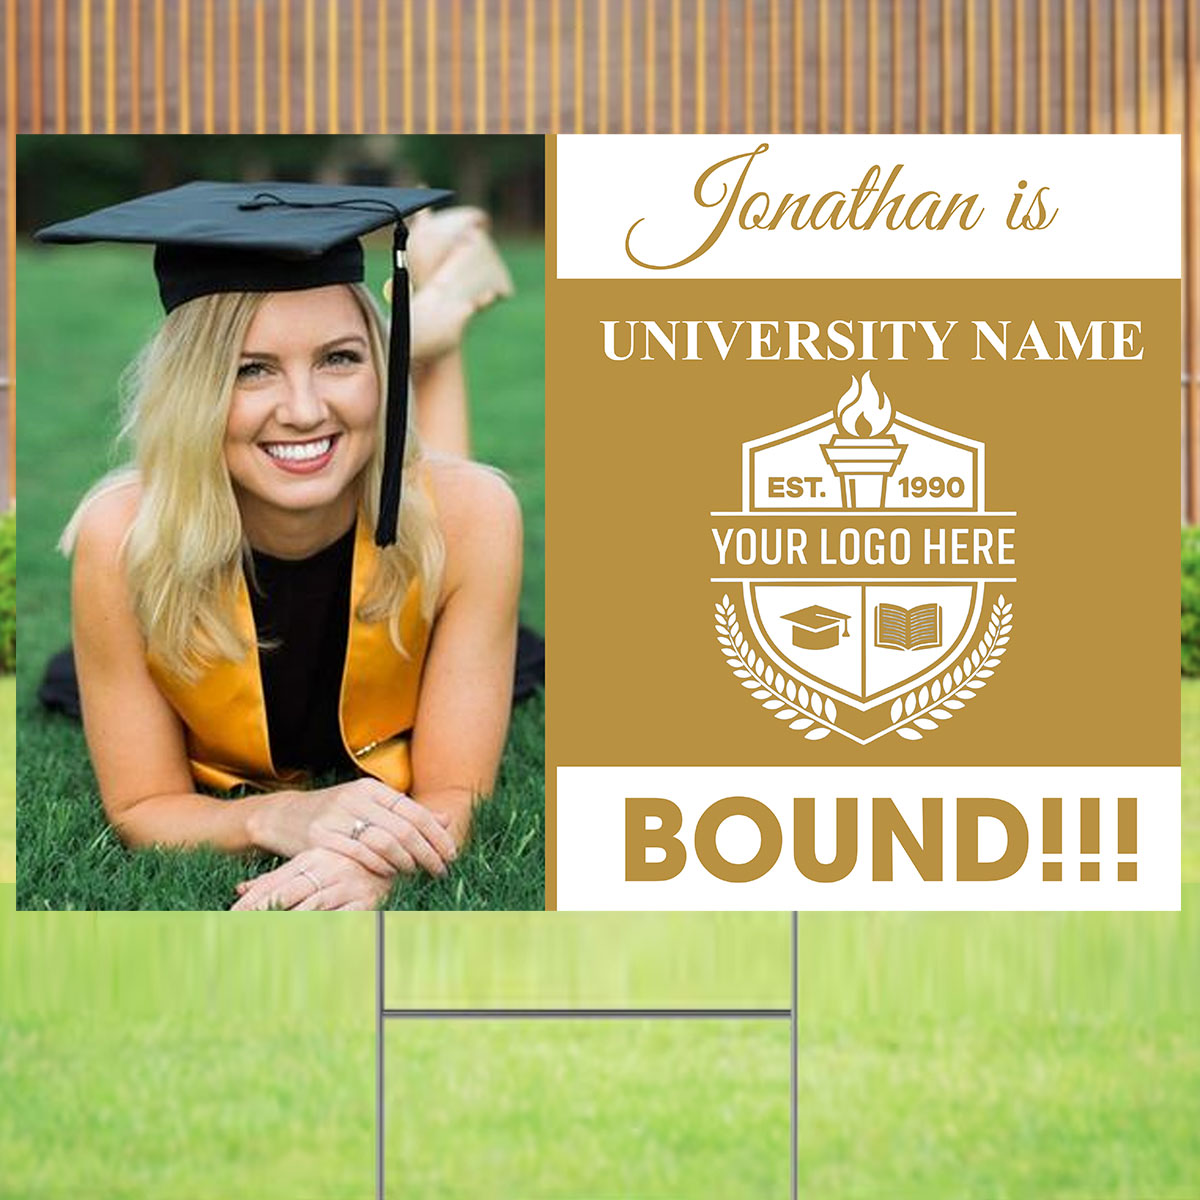 Congrats Custom Background, Logo, Photo And Texts - Personalized Lawn Sign, Yard Sign, Graduation Gift